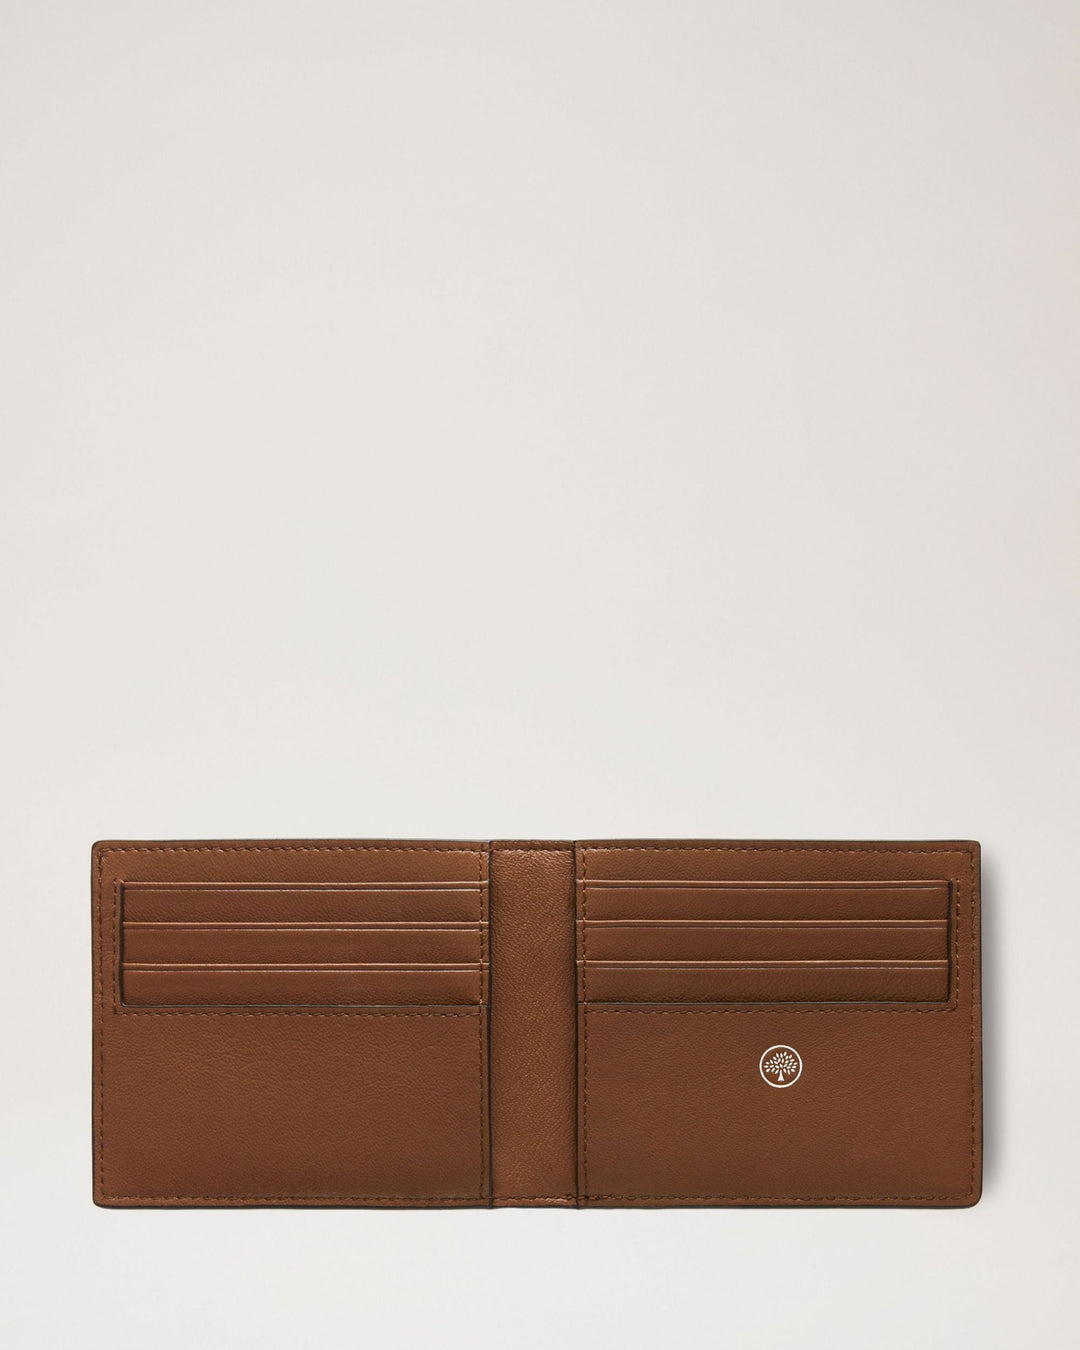 Mulberry-8-Card-Wallet-Two-Tone-Scg-Brown-2